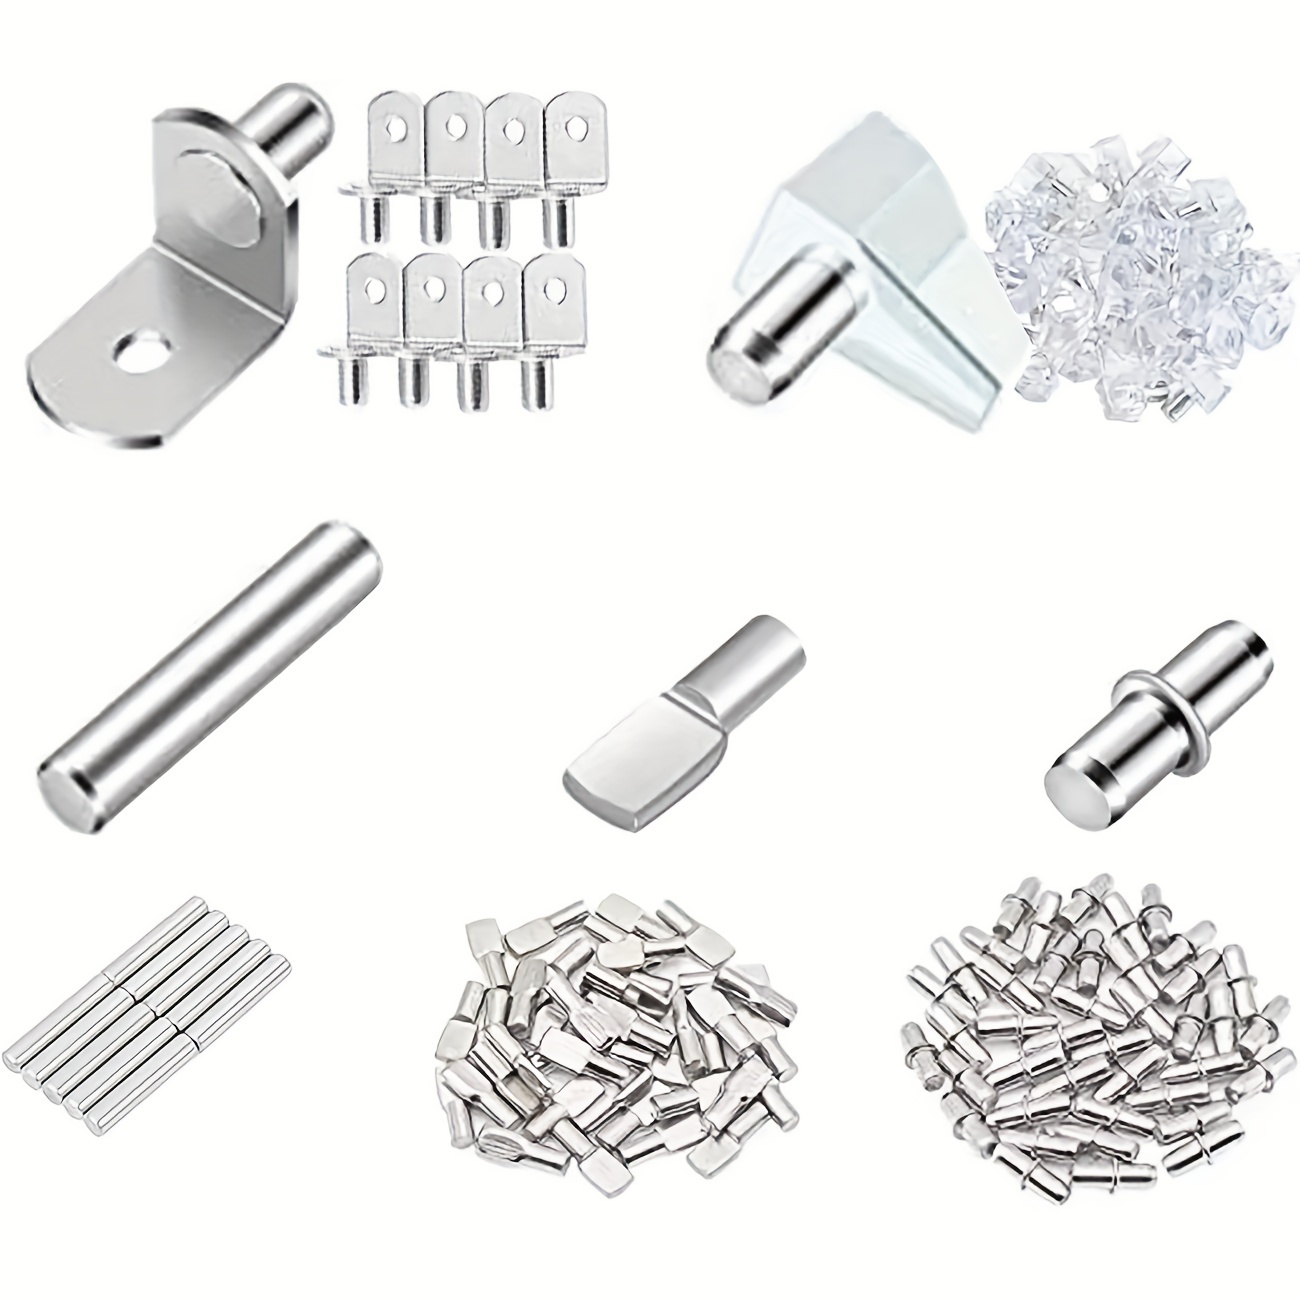 150 Pcs Shelf Pin Pegs Kit 5 Styles Cabinet Support Studs Holder Metal  Nickel Plated Shelf Bracket for Shelves Furniture Cupboard Closet Bookcase